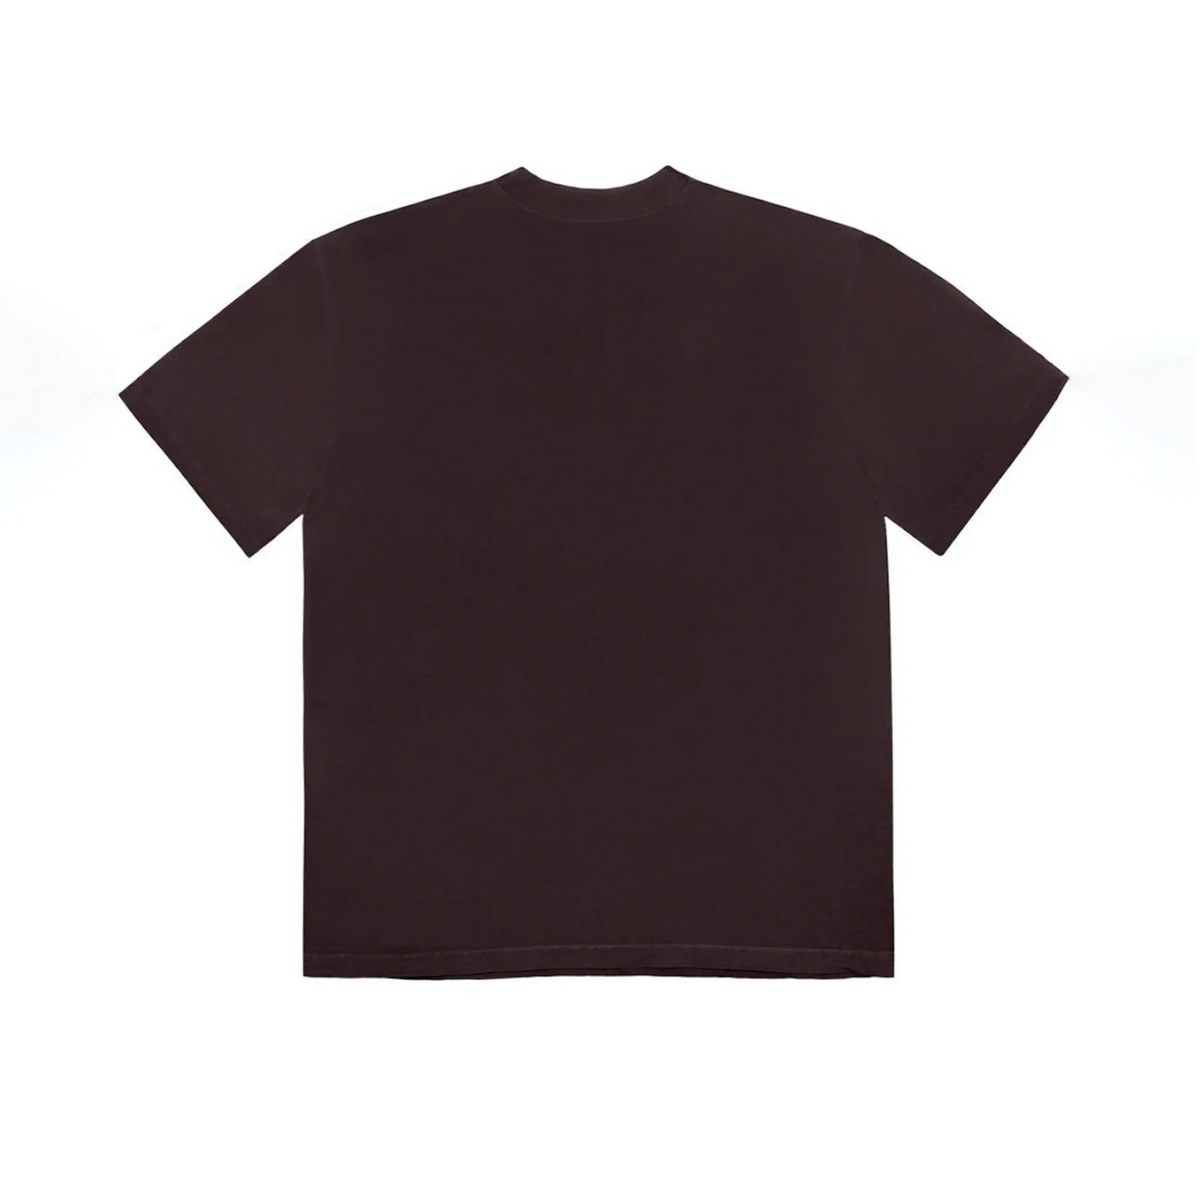 Travis Scott Cactus Jack For Fragment Icons Tee "Brown"